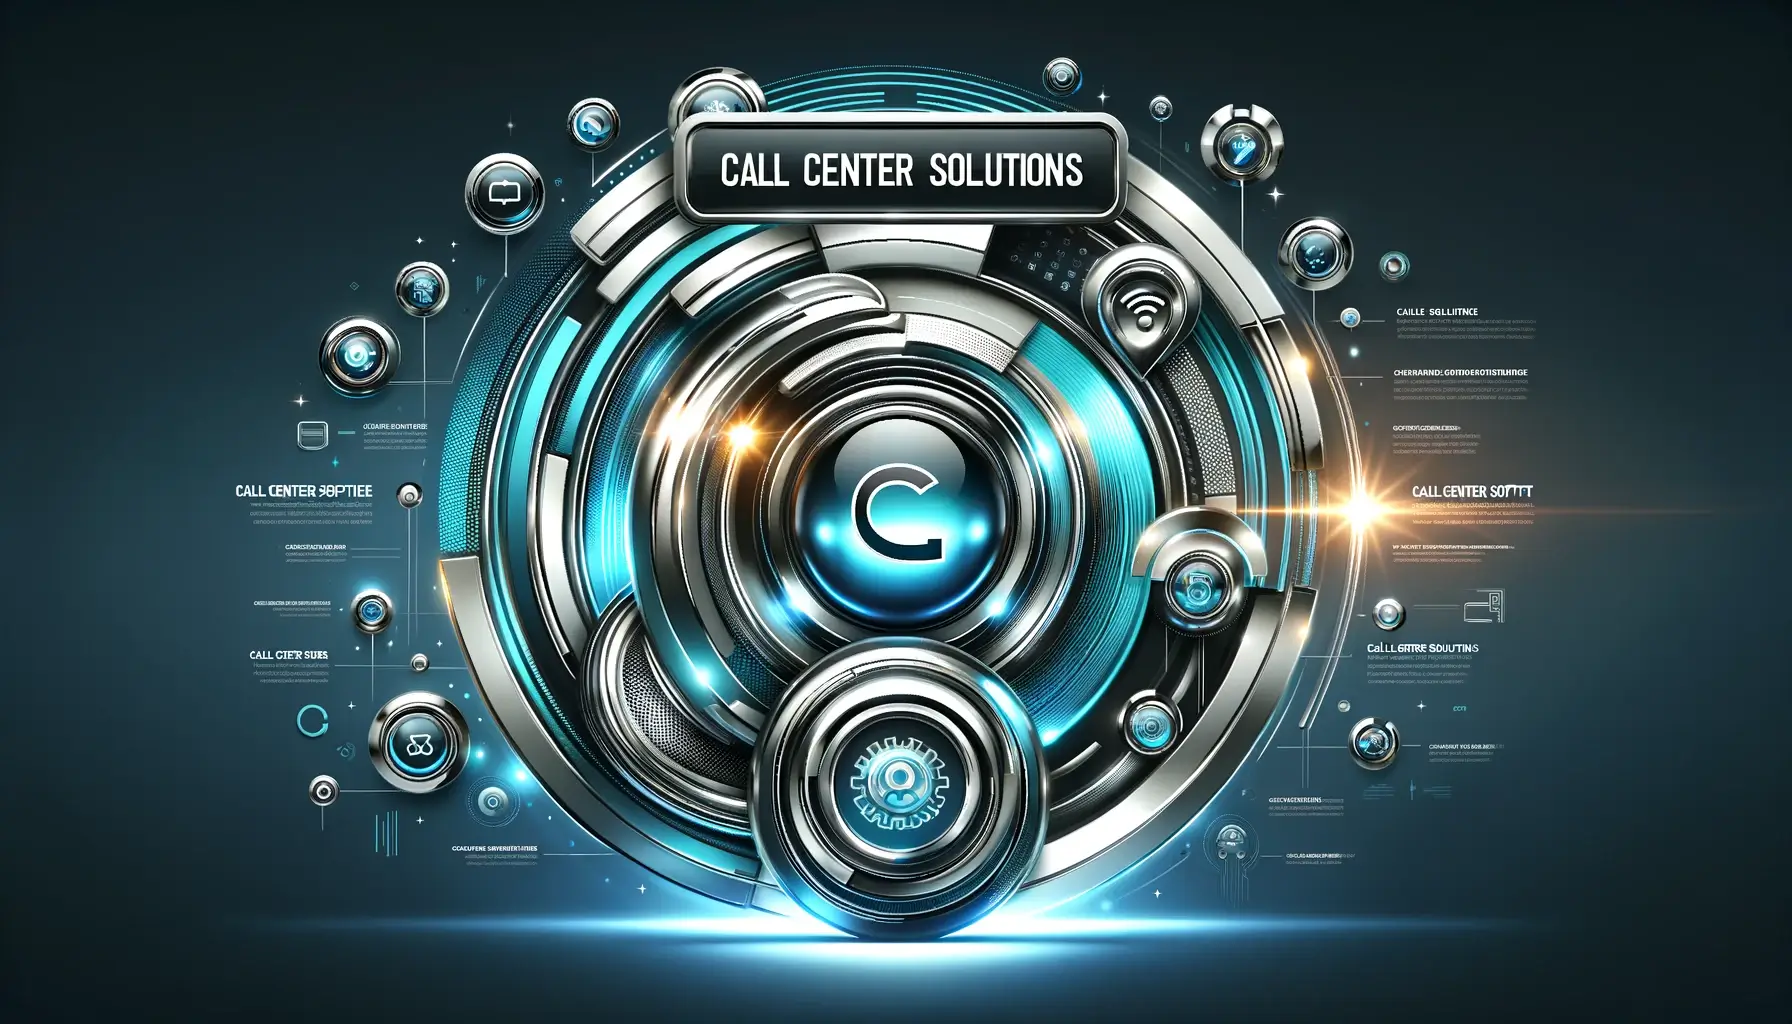 Call center solutions